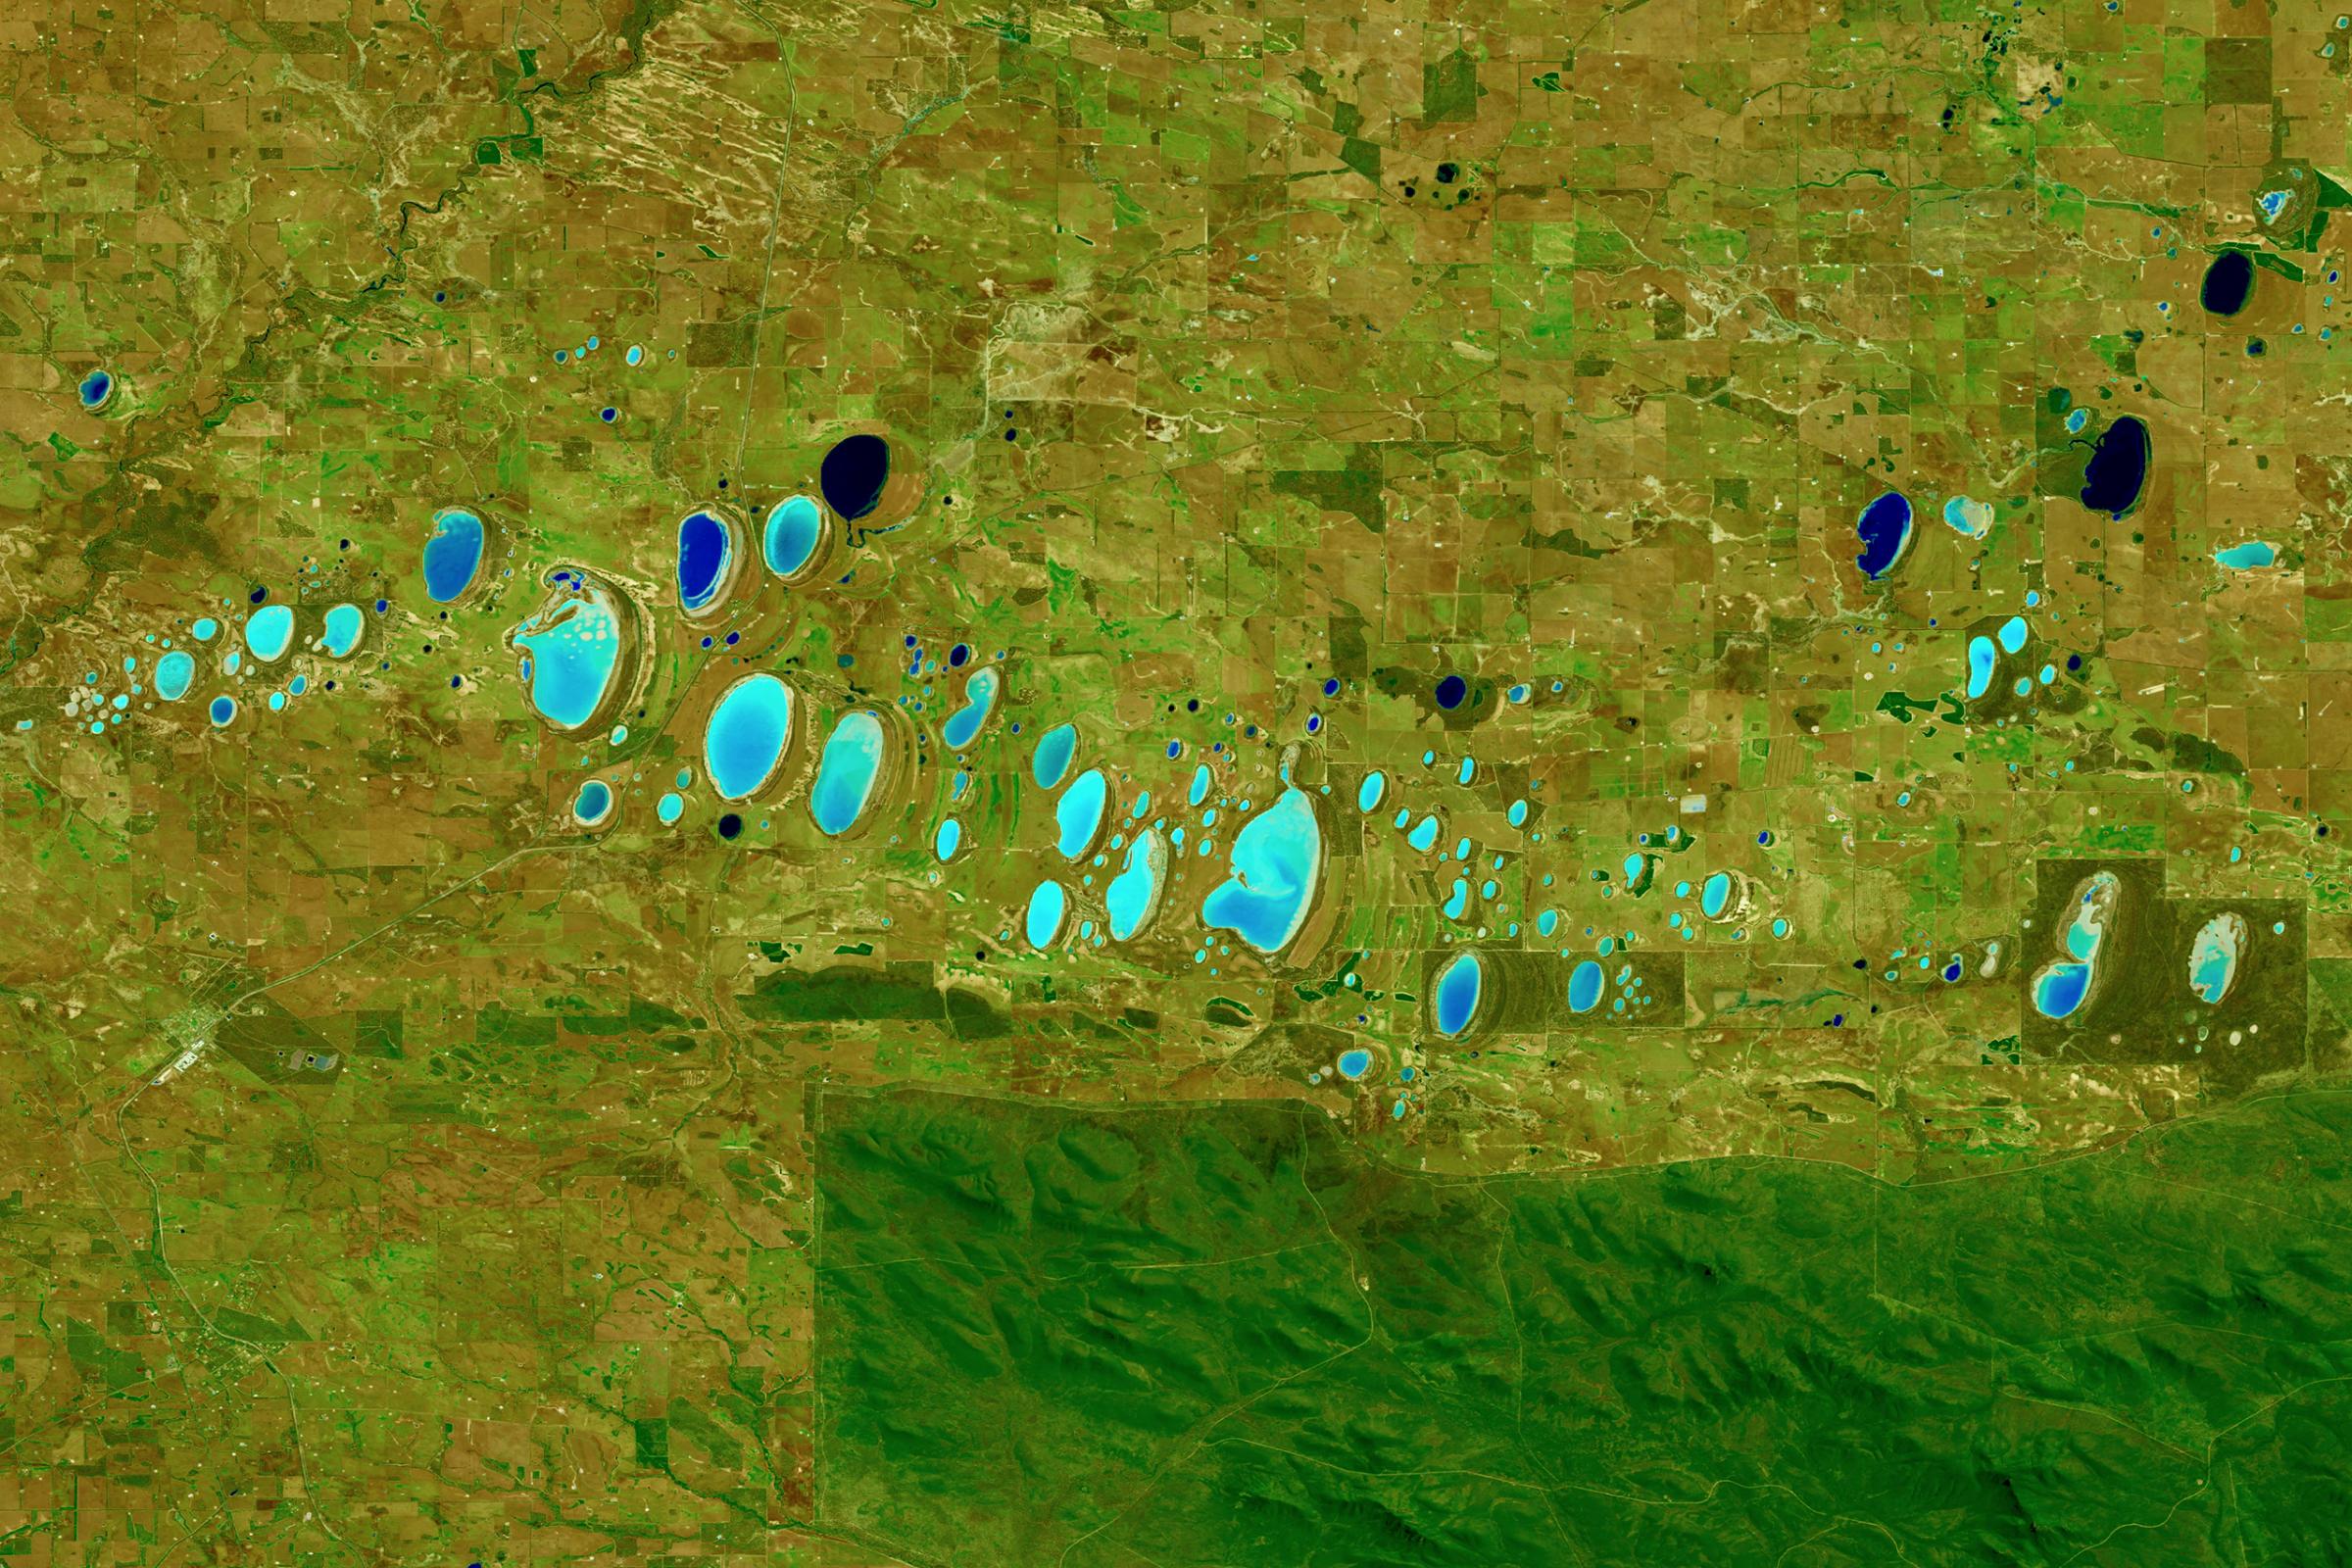 Stirling Range National Park, AustraliaA shortwave infrared image of chain of saline lakes, which vary in color as a result of differing sediments, aquatic and terrestrial plant growth, water chemistry, algae, and hydrology. Shortwave infrared is helpful in differentiating wet earth from dry earth. Oct. 21, 2015.